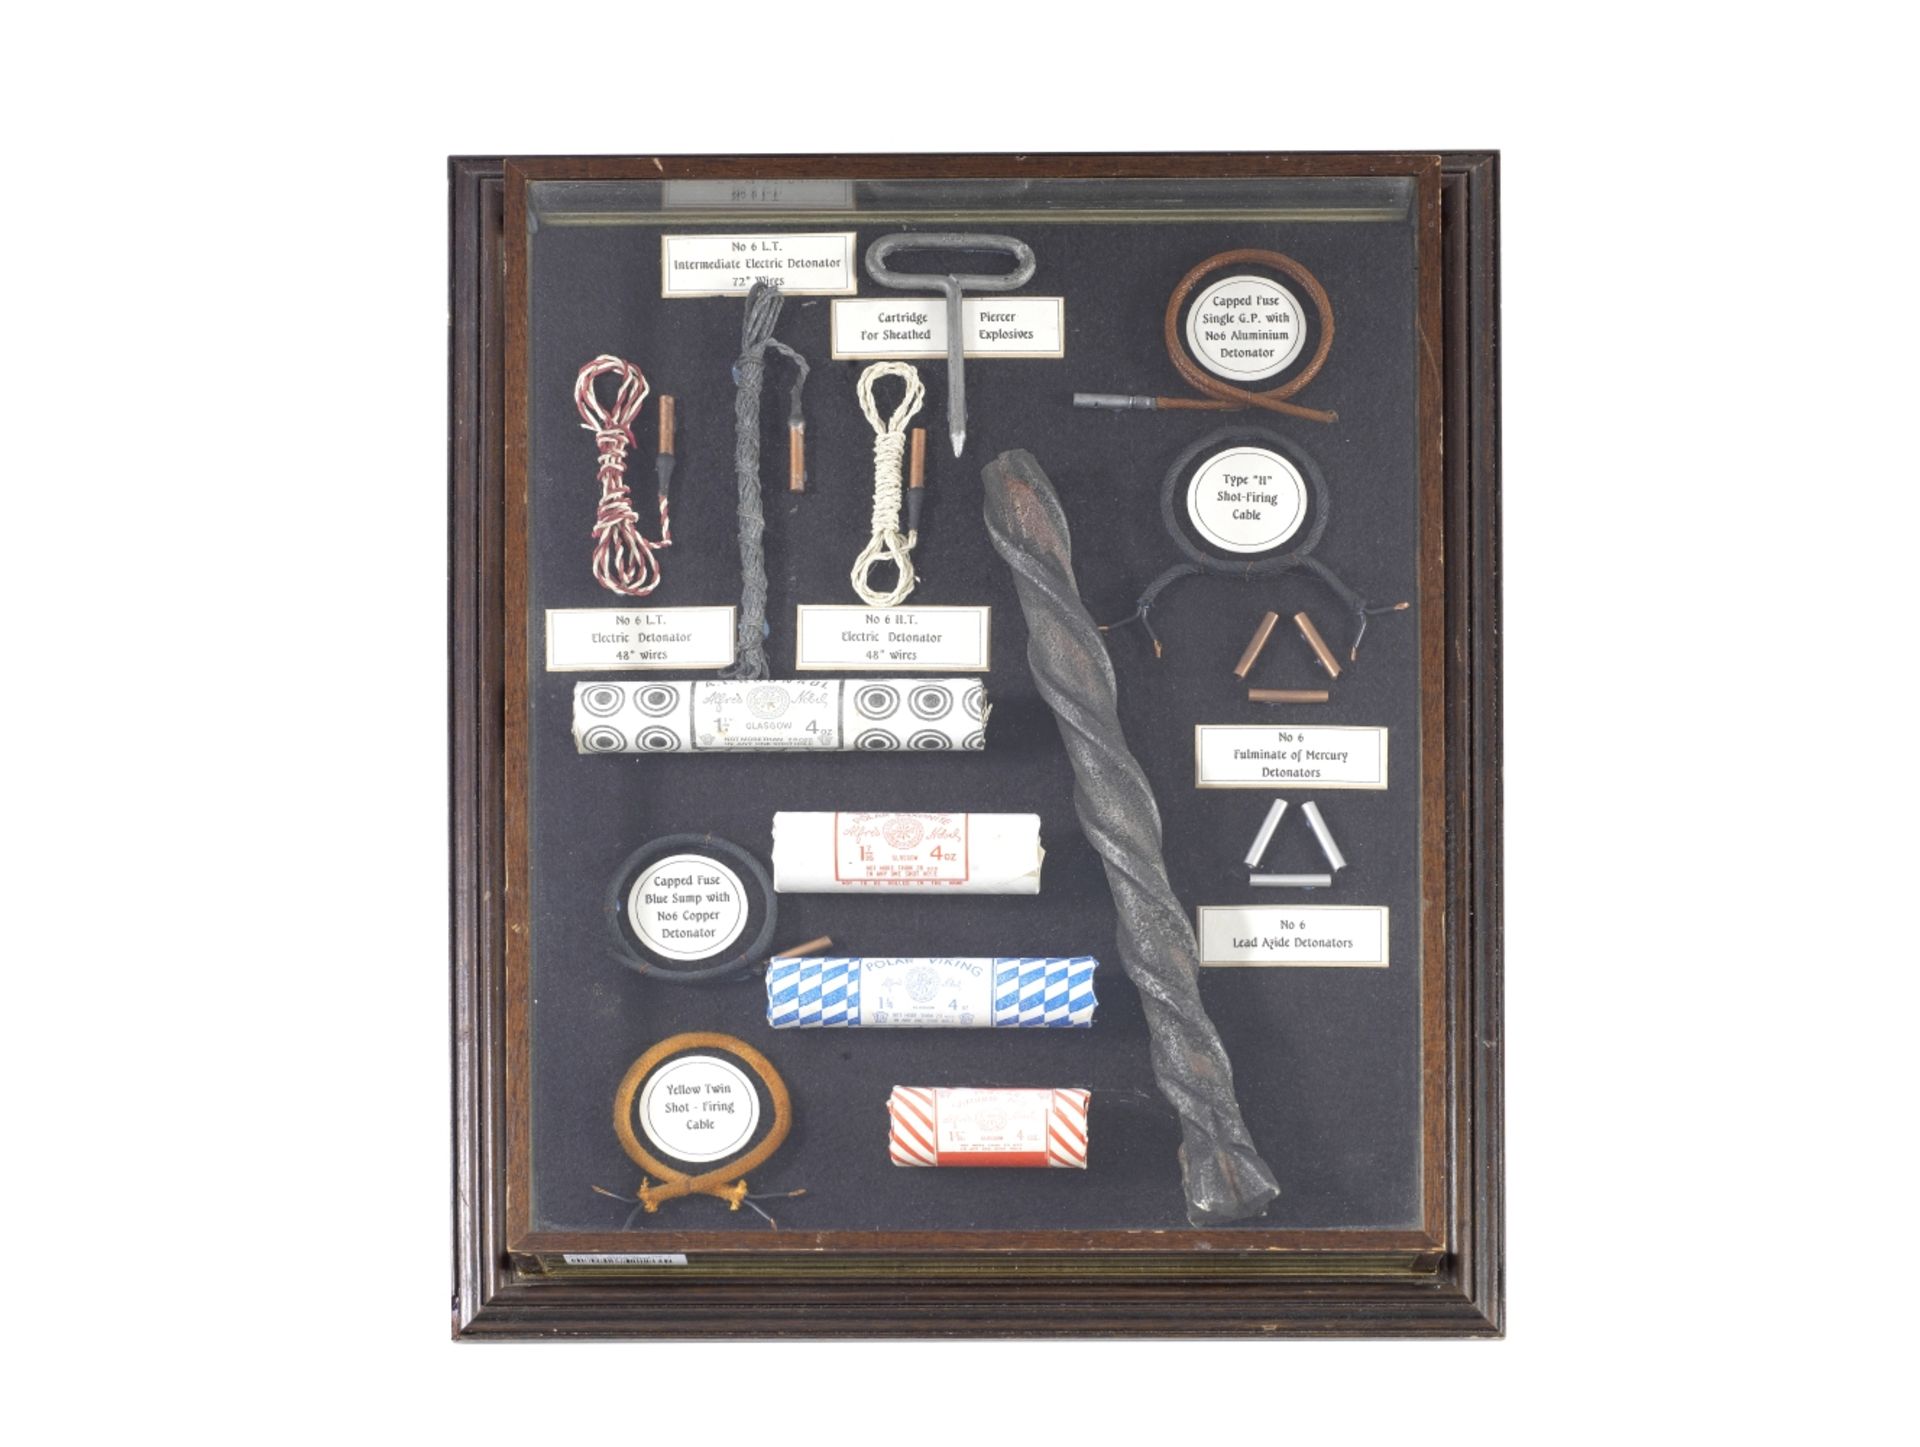 Alfred Noble explosives display case